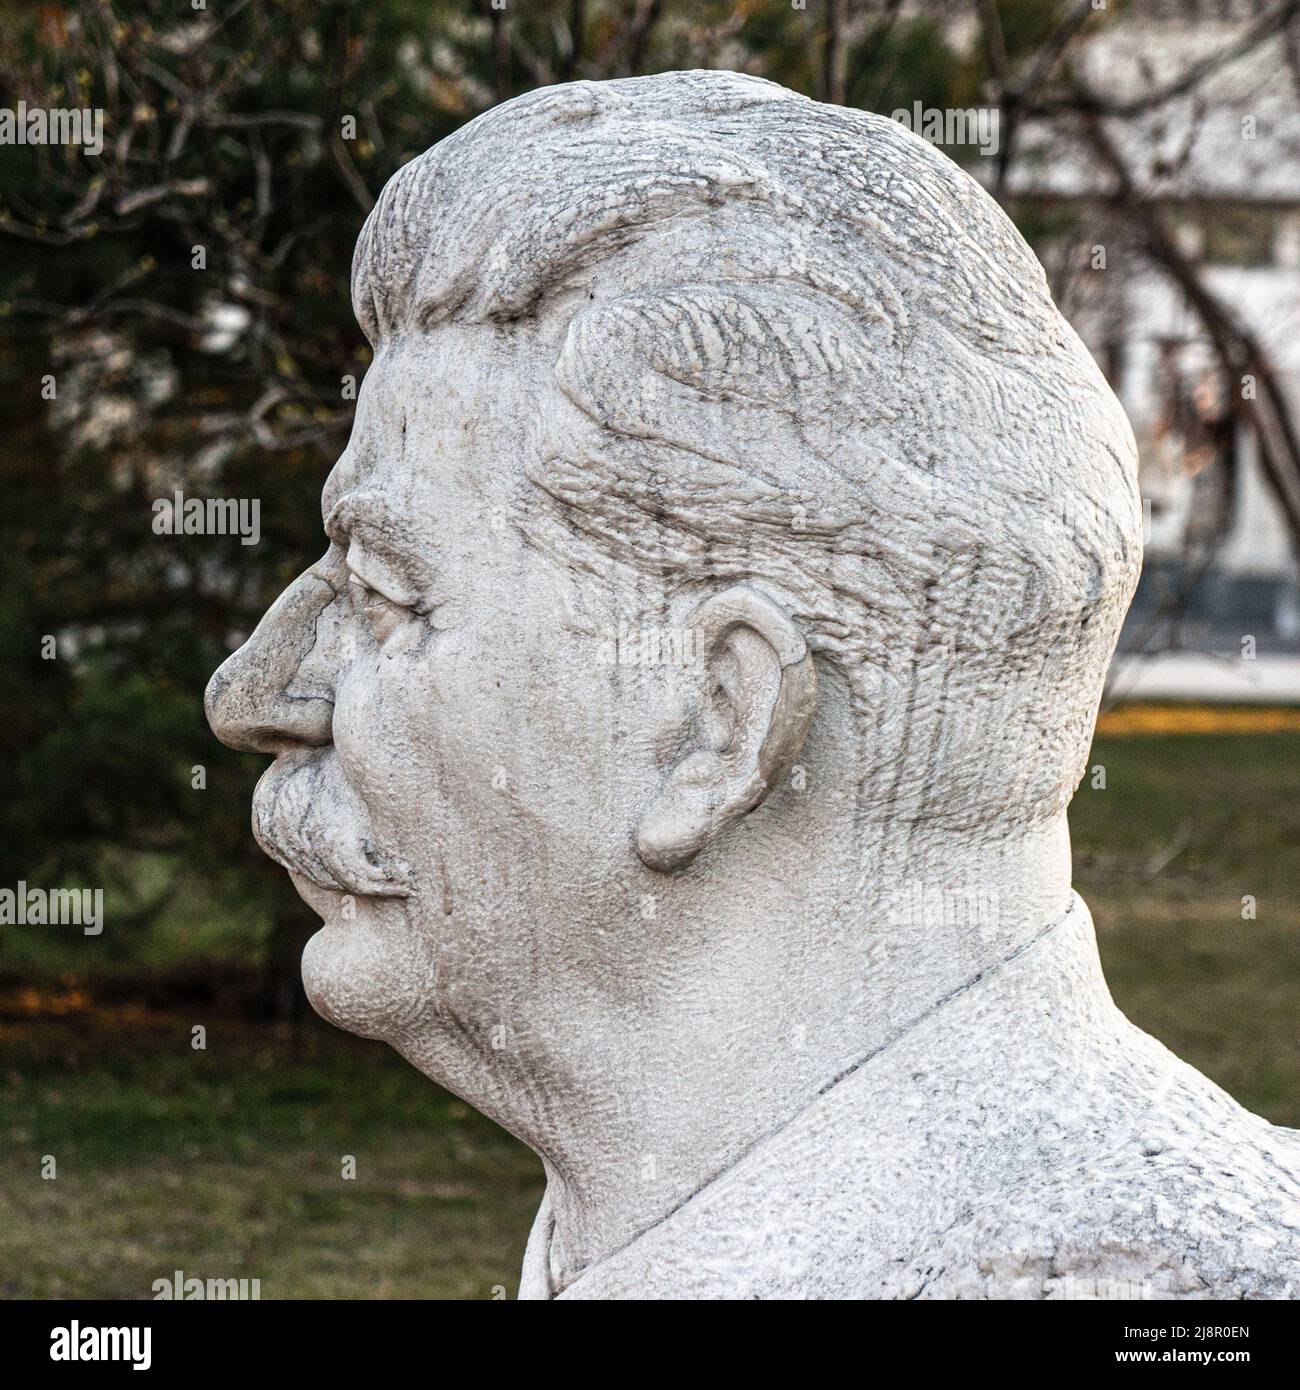 MOSCOW, RUSSIA - March 24, 2020 Side angle view of marble bust of Joseph Vissarionovich Stalin, in Fallen Monument Park. Stock Photo